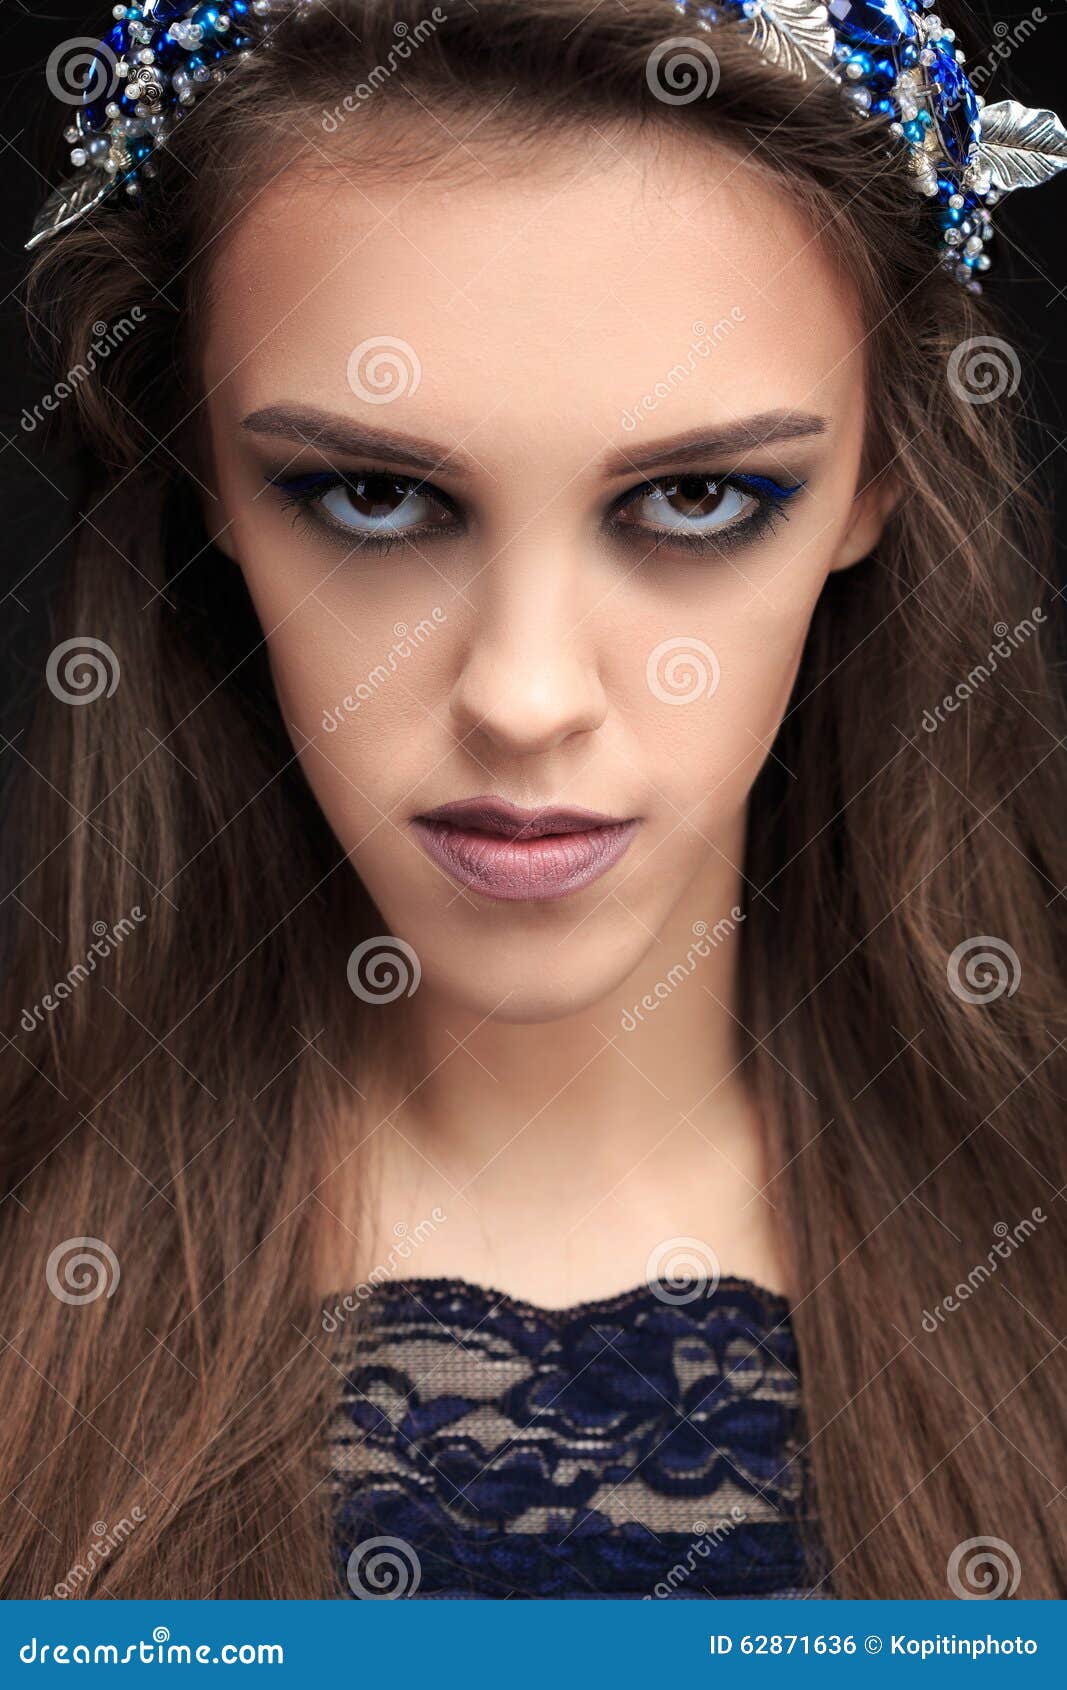 Terrible Girl With A Long Face In The Diadem Stock Photo Image Of Makeup Classic 62871636